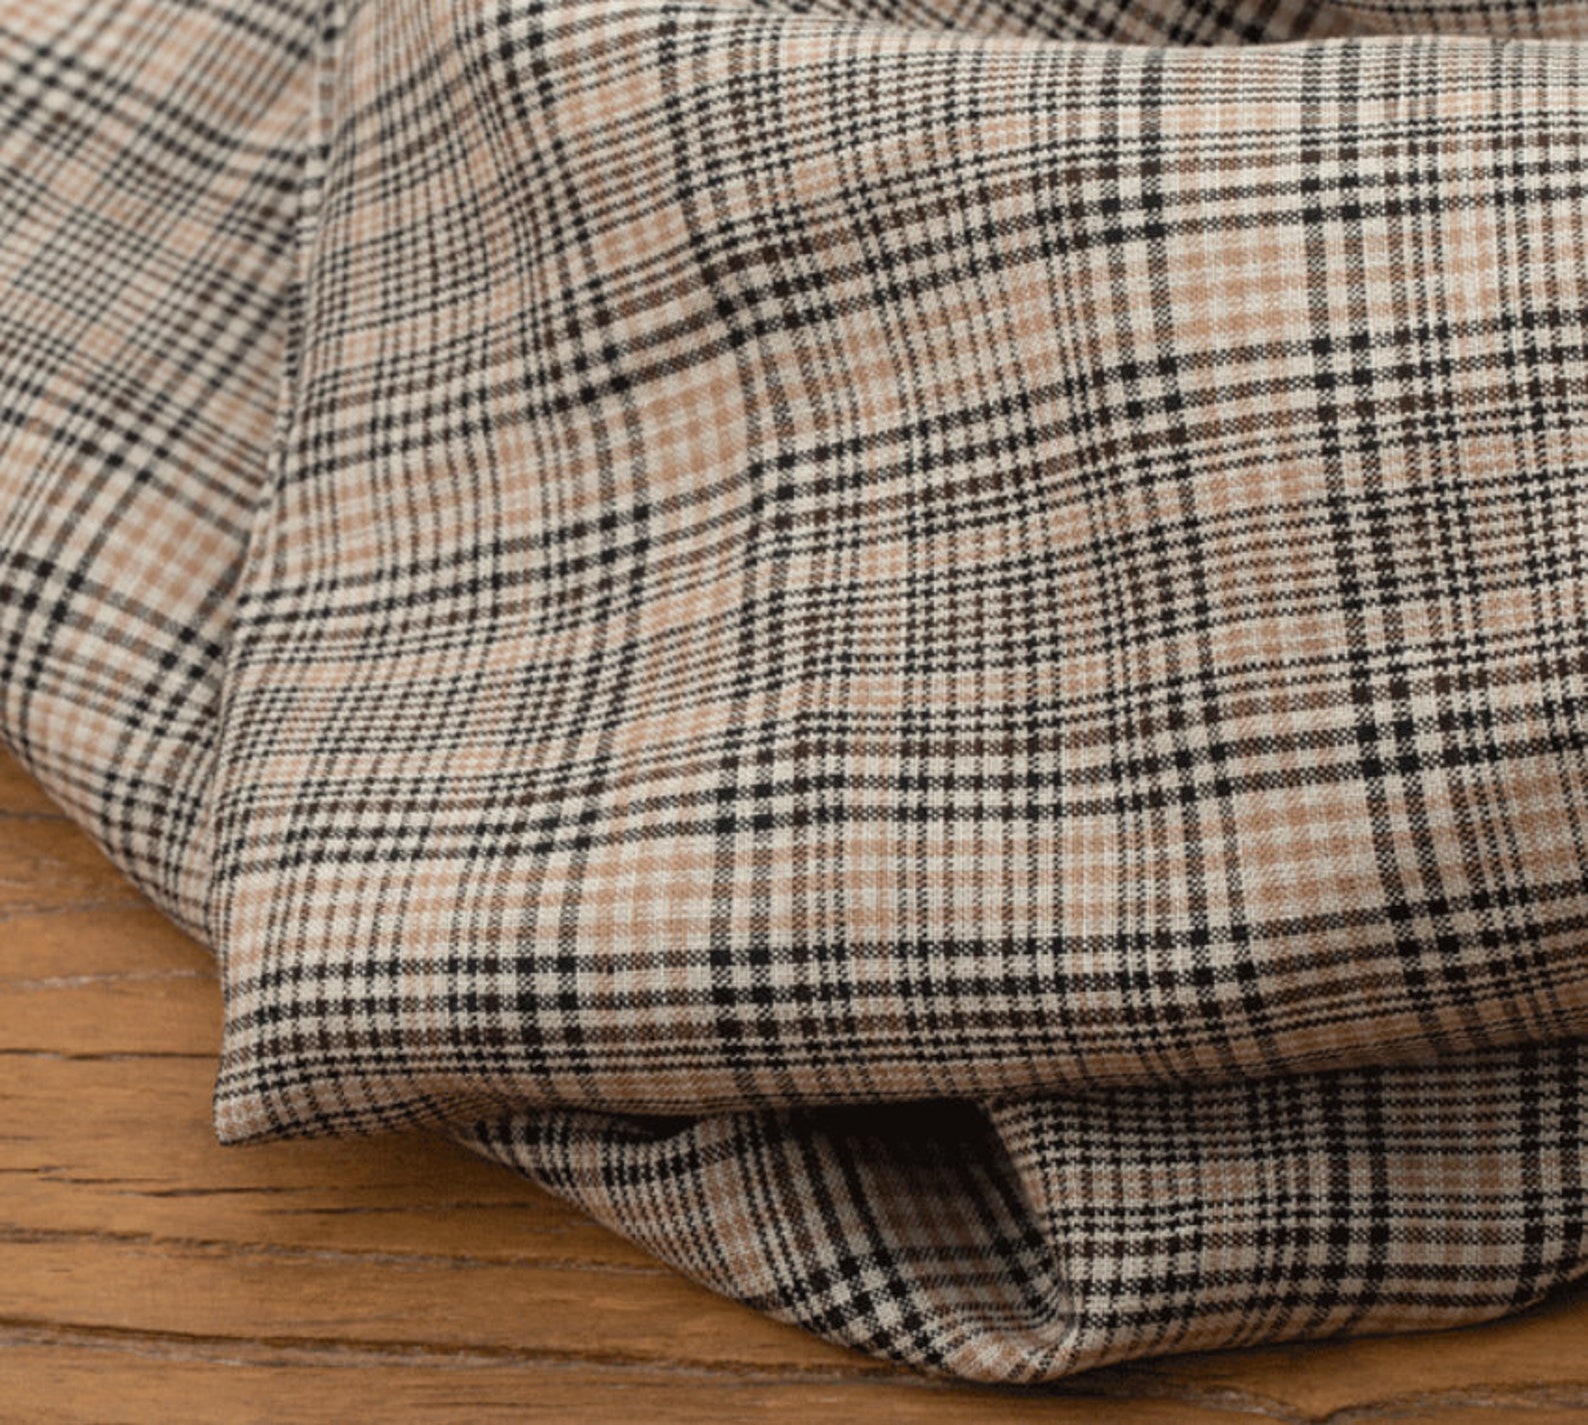 Plaid Linen Fabric by the Yard - Etsy UK